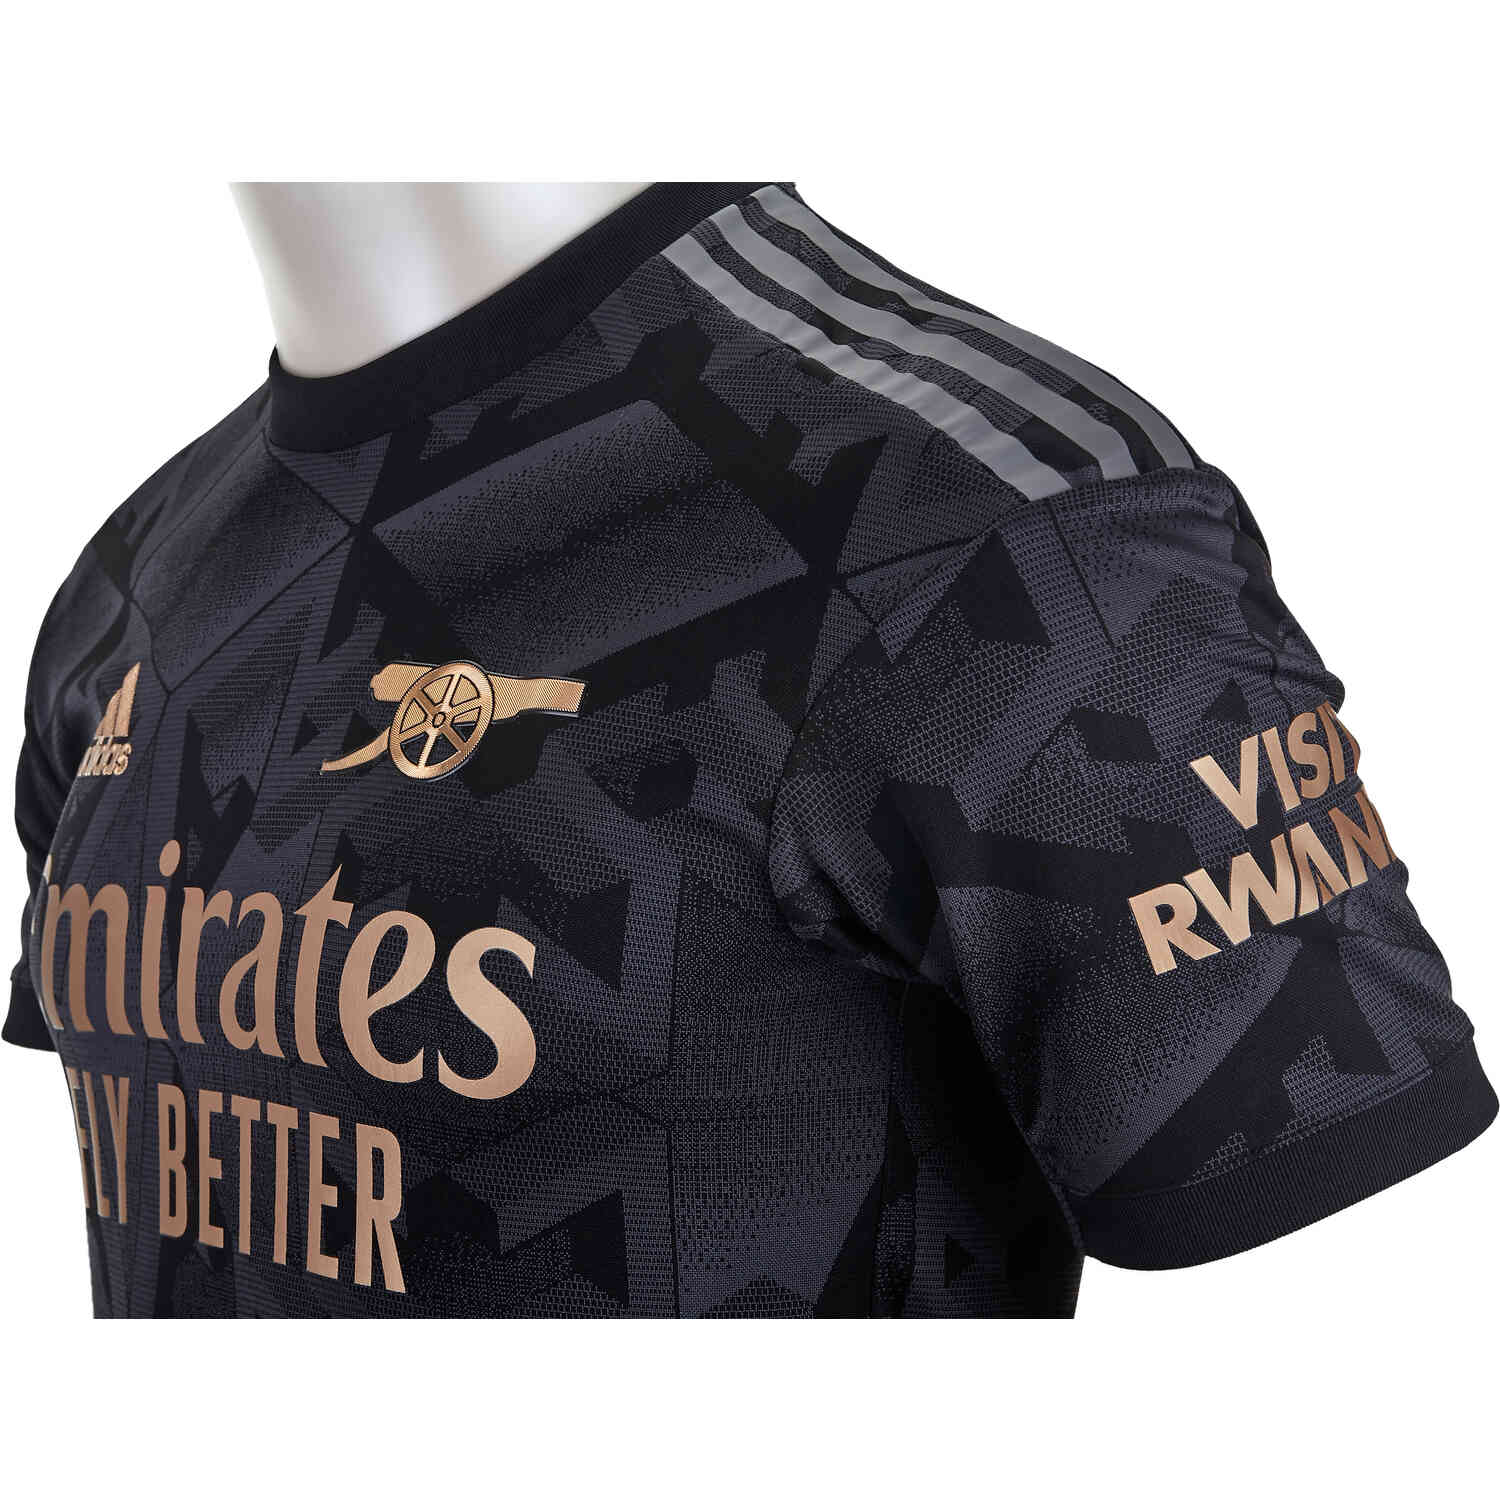 2022/23 adidas Real Madrid Away Authentic Jersey - SoccerPro